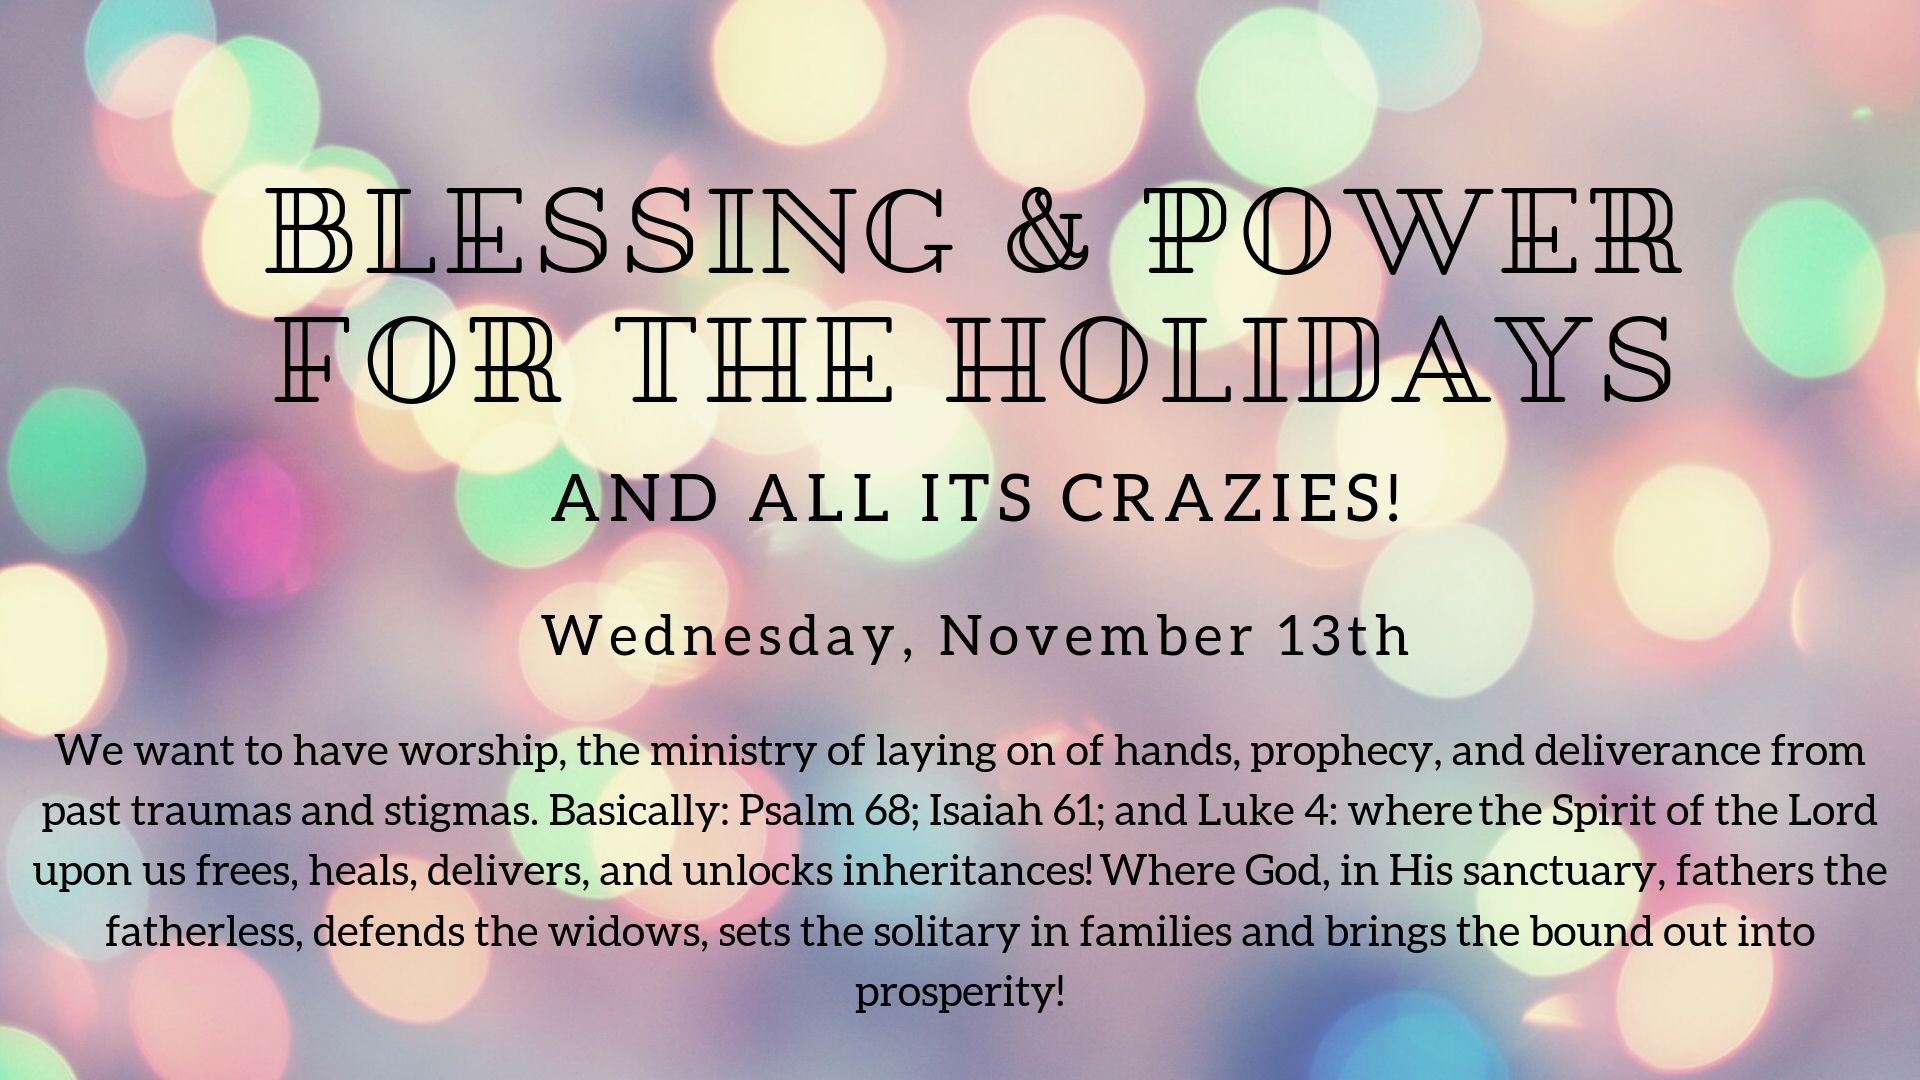 “Blessing and Power for the Holidays and all its Crazies!”